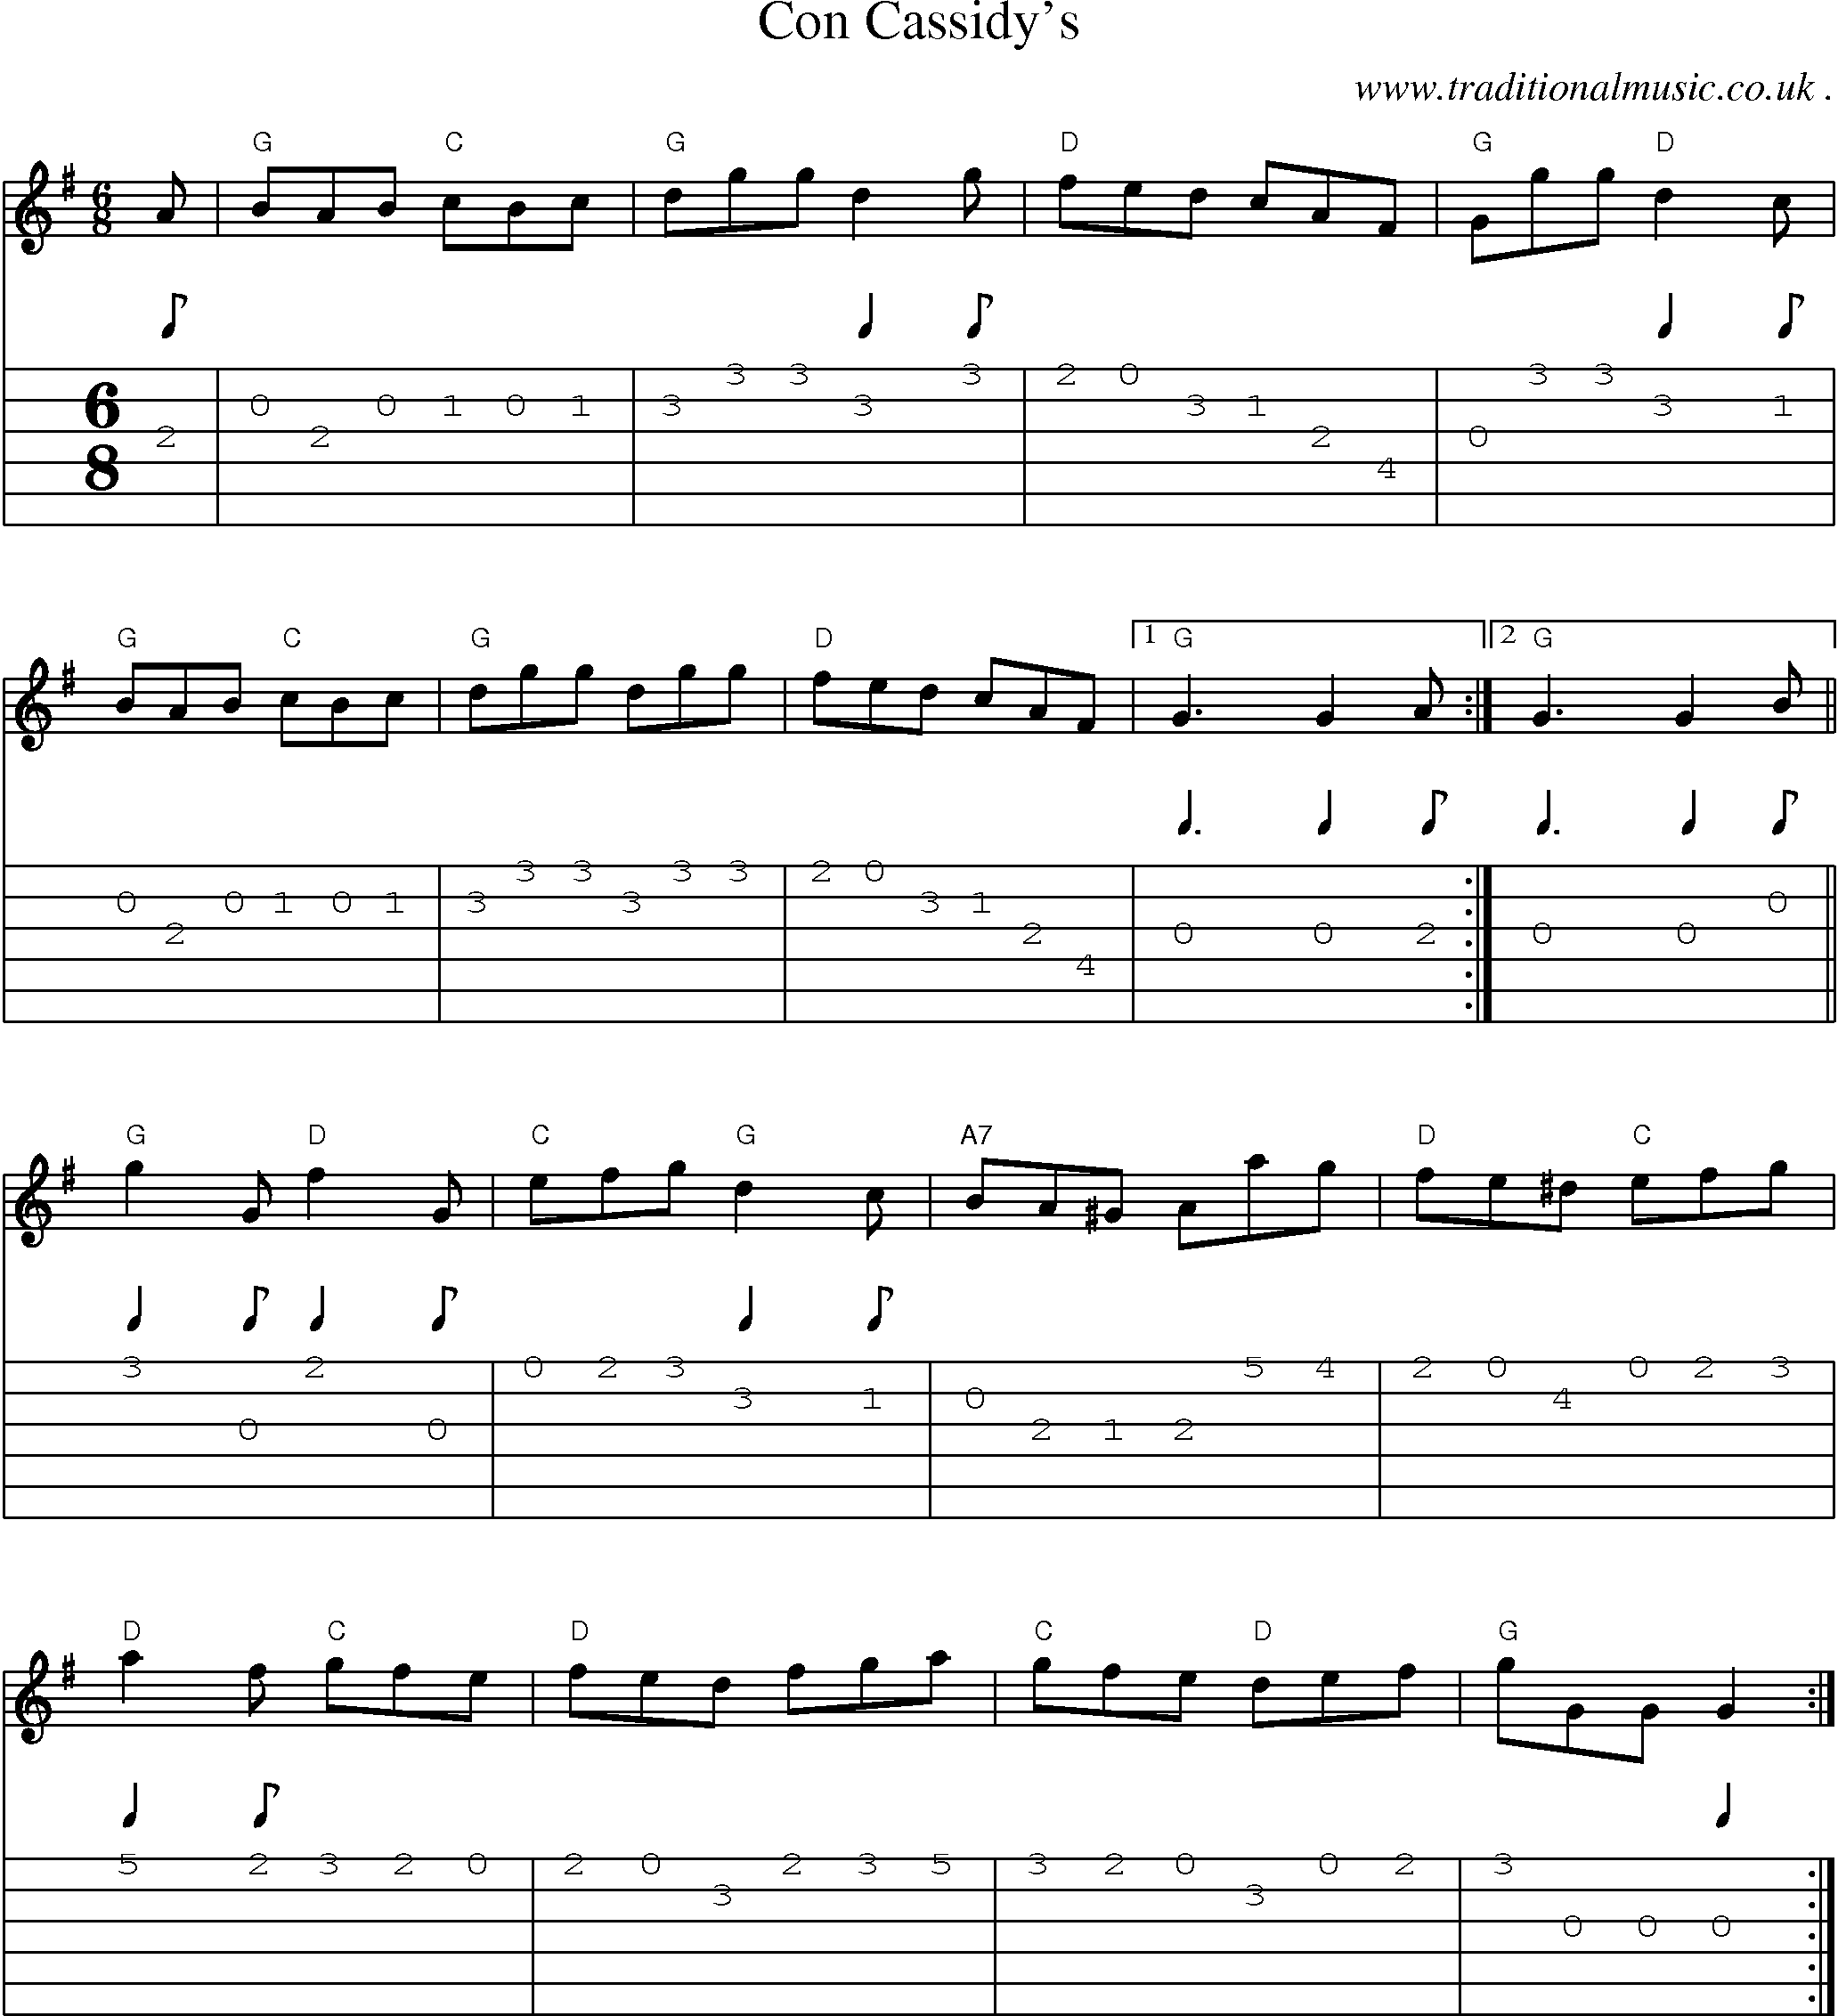 Music Score and Guitar Tabs for Con Cassidys